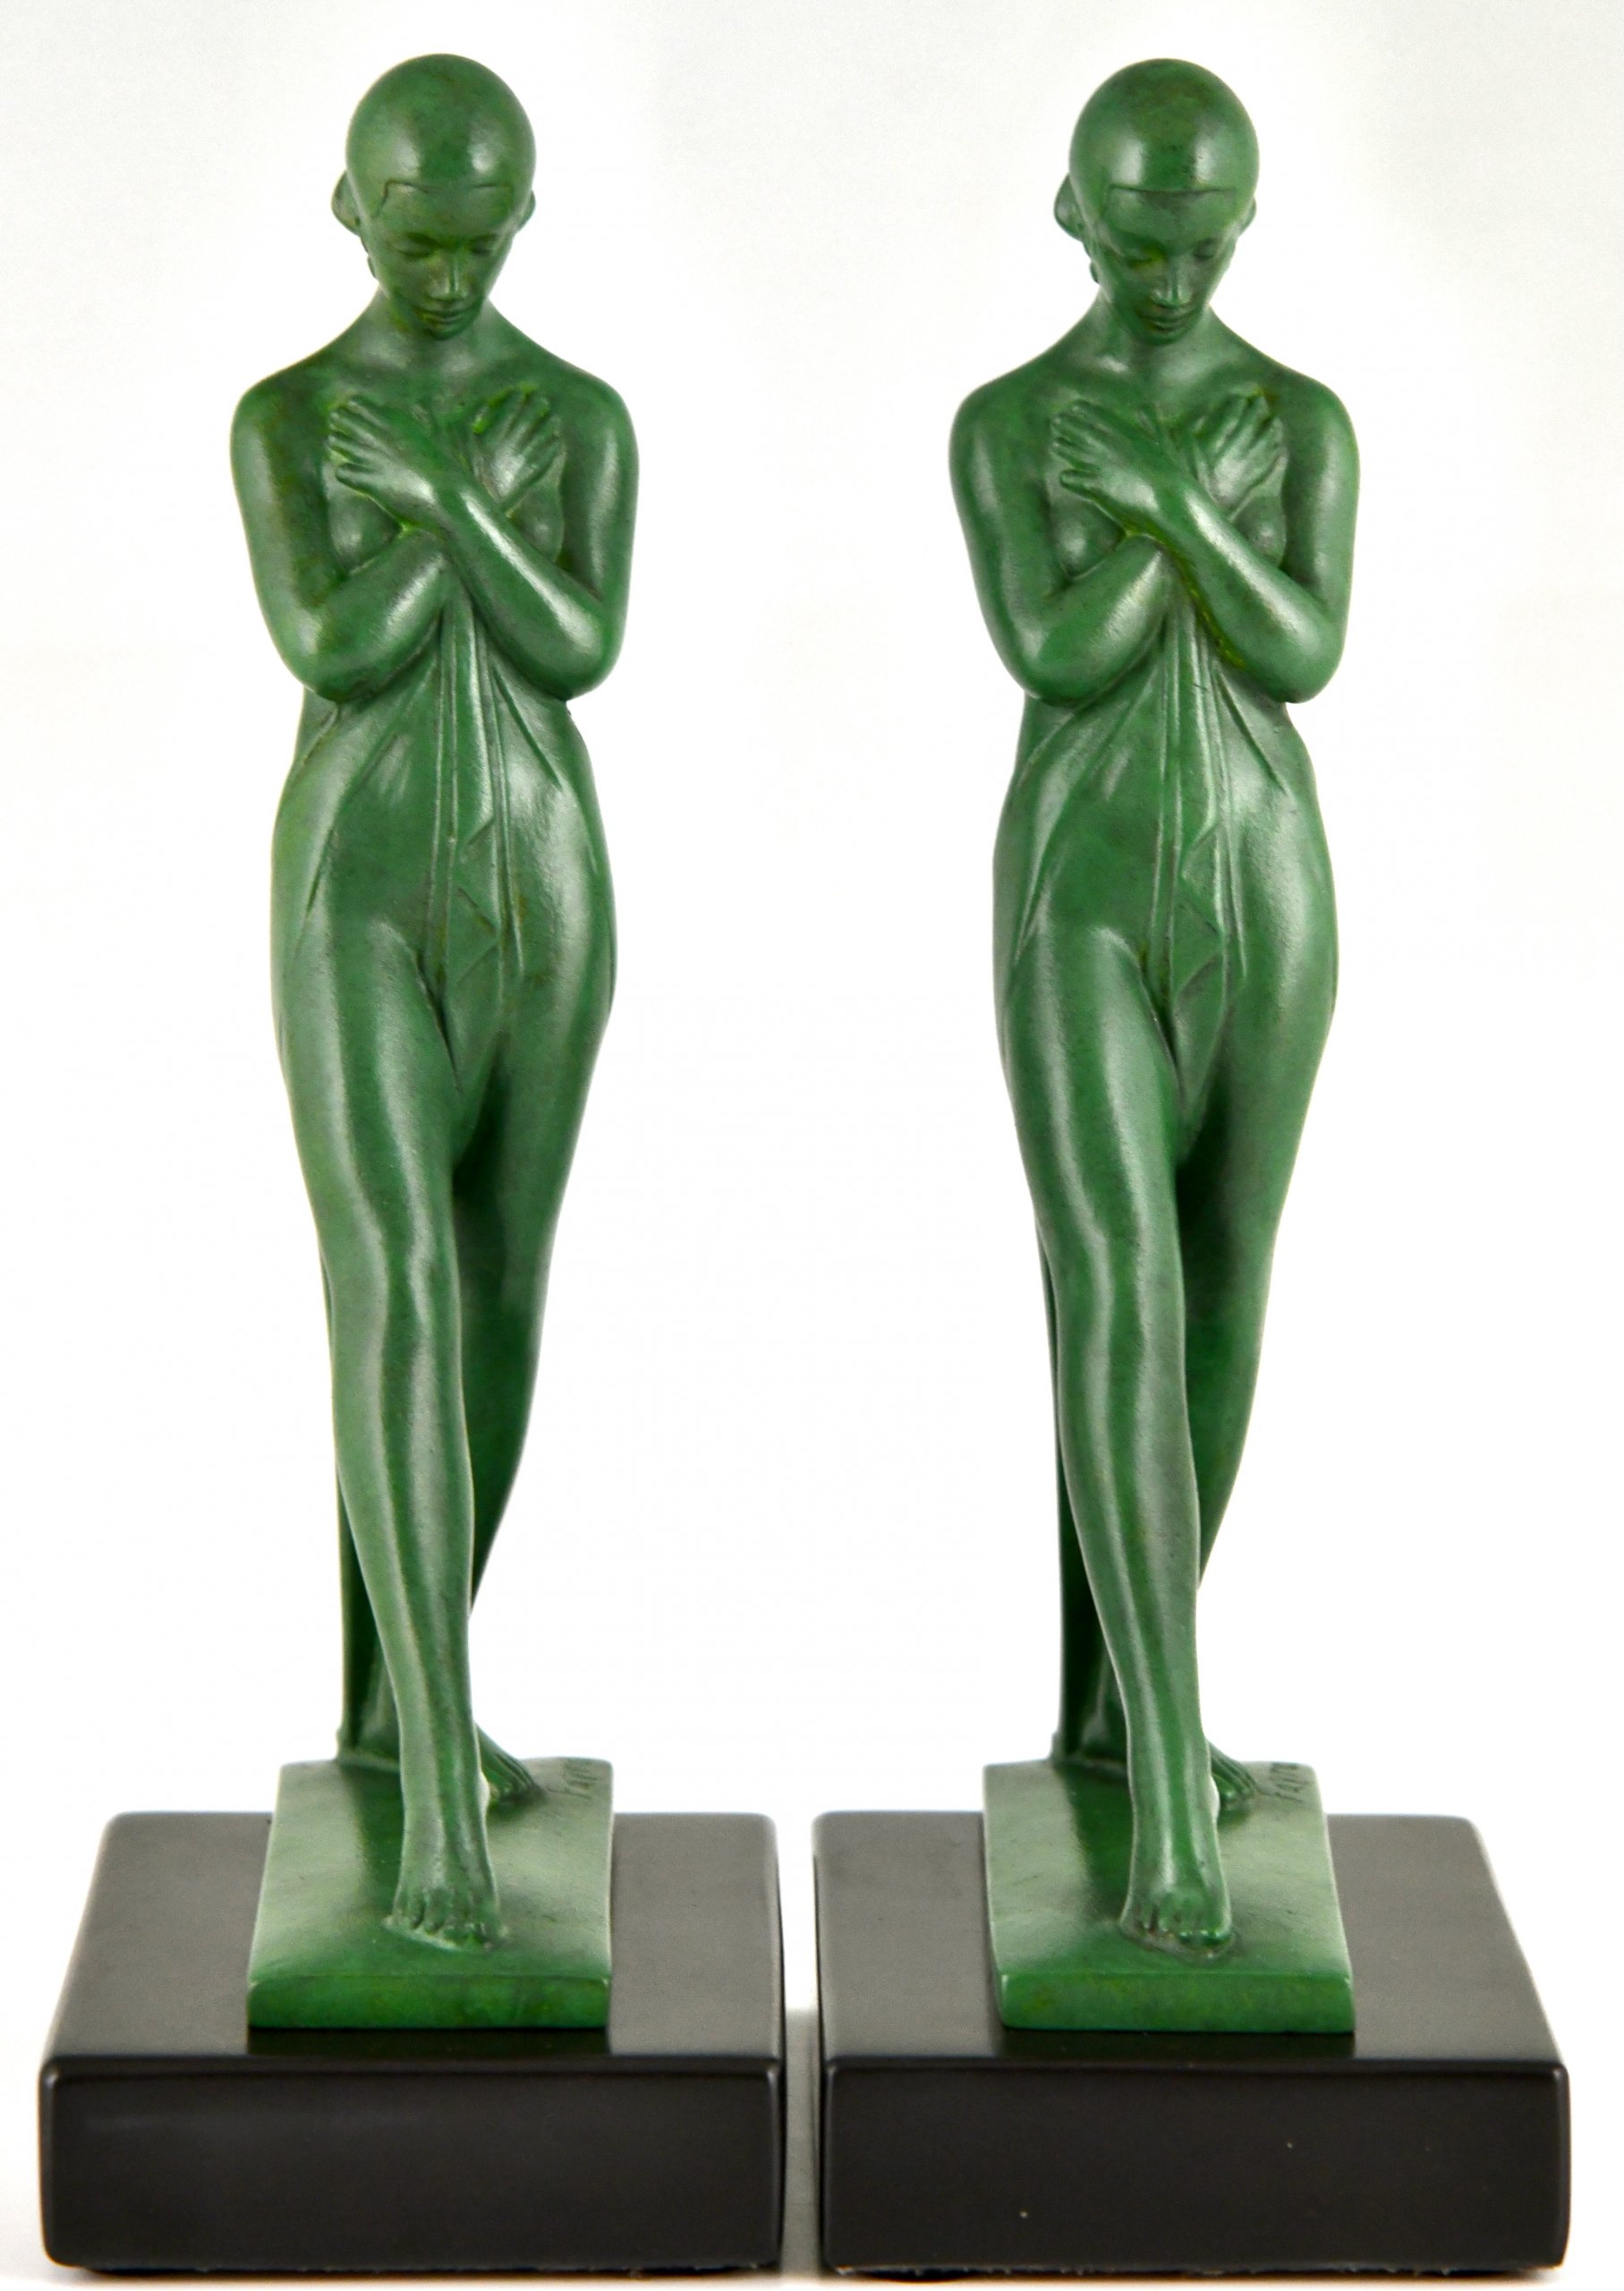 Art Deco bookends with standing nudes Meditation